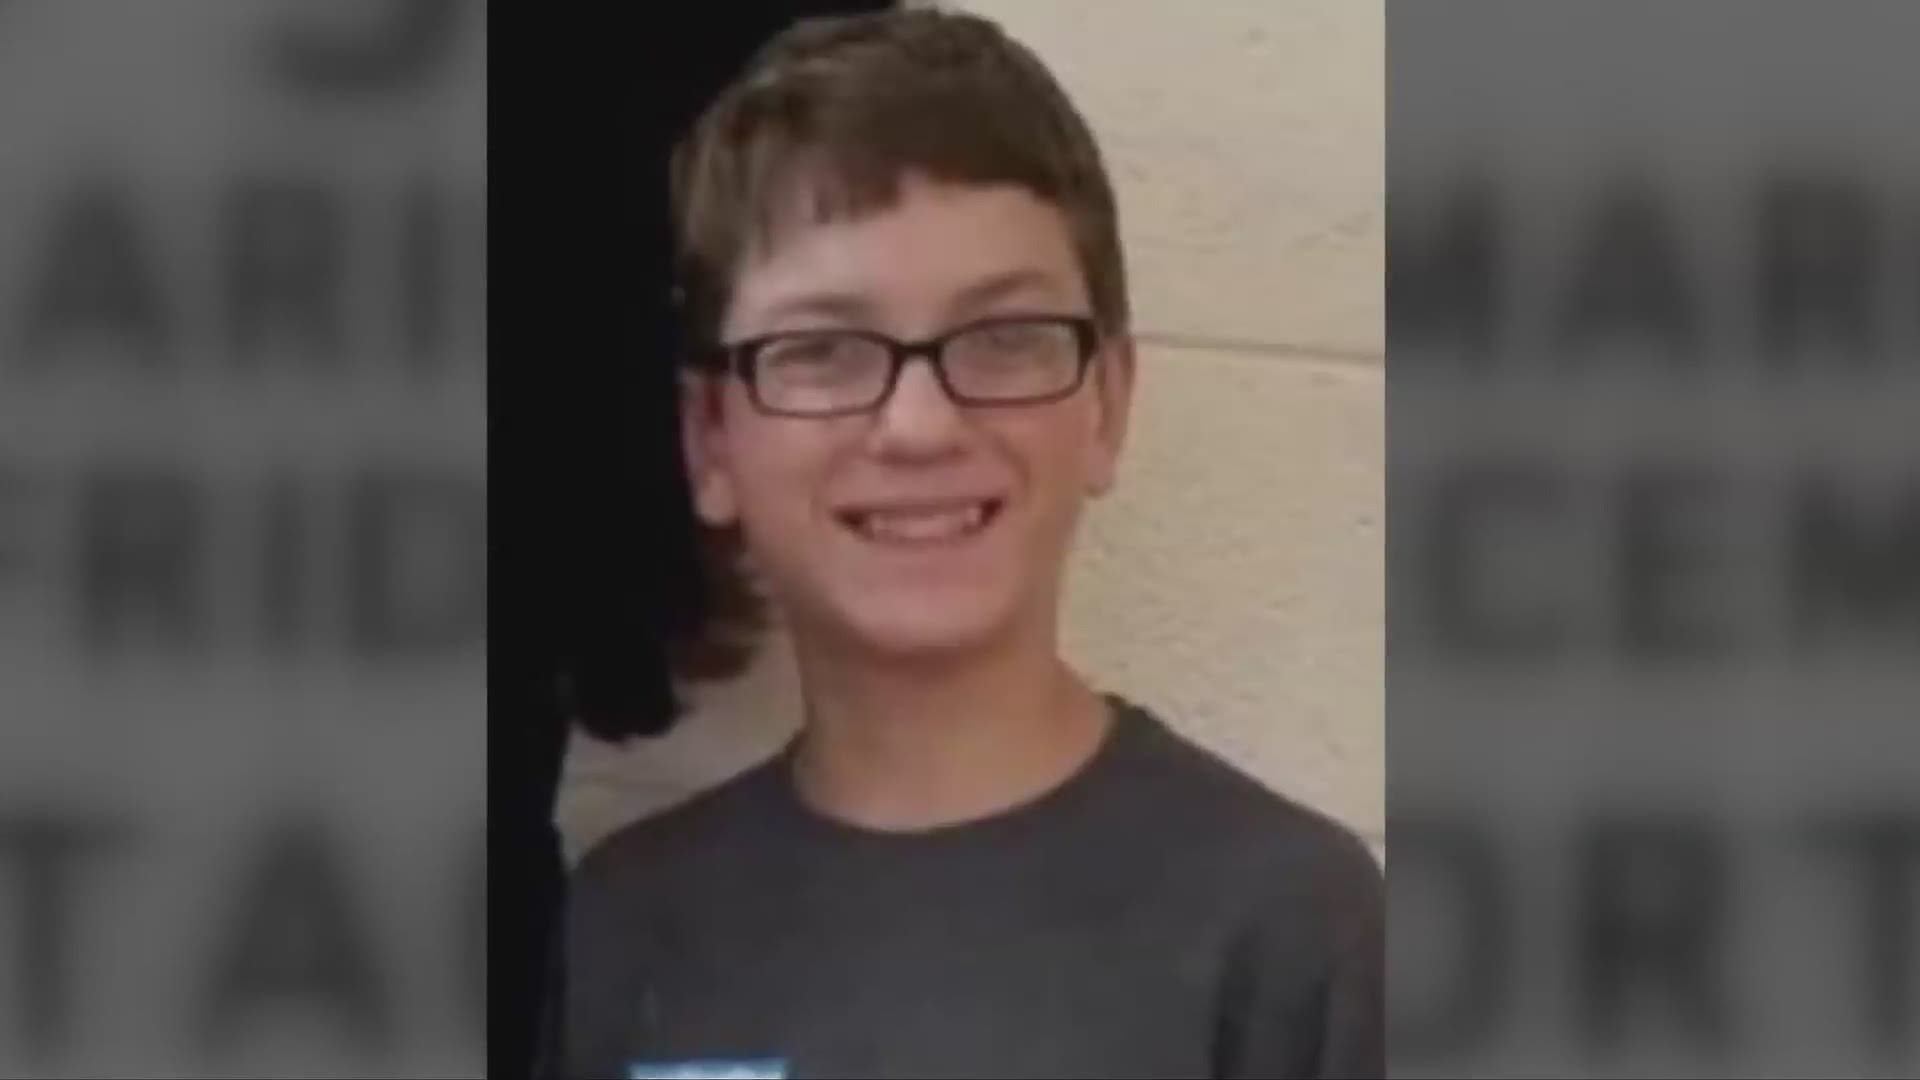 Jan. 14, 2020: Authorities have confirmed that 14-year-old Harley Dilly has been 'recovered' after a weeks-long search to find the missing Port Clinton teen.